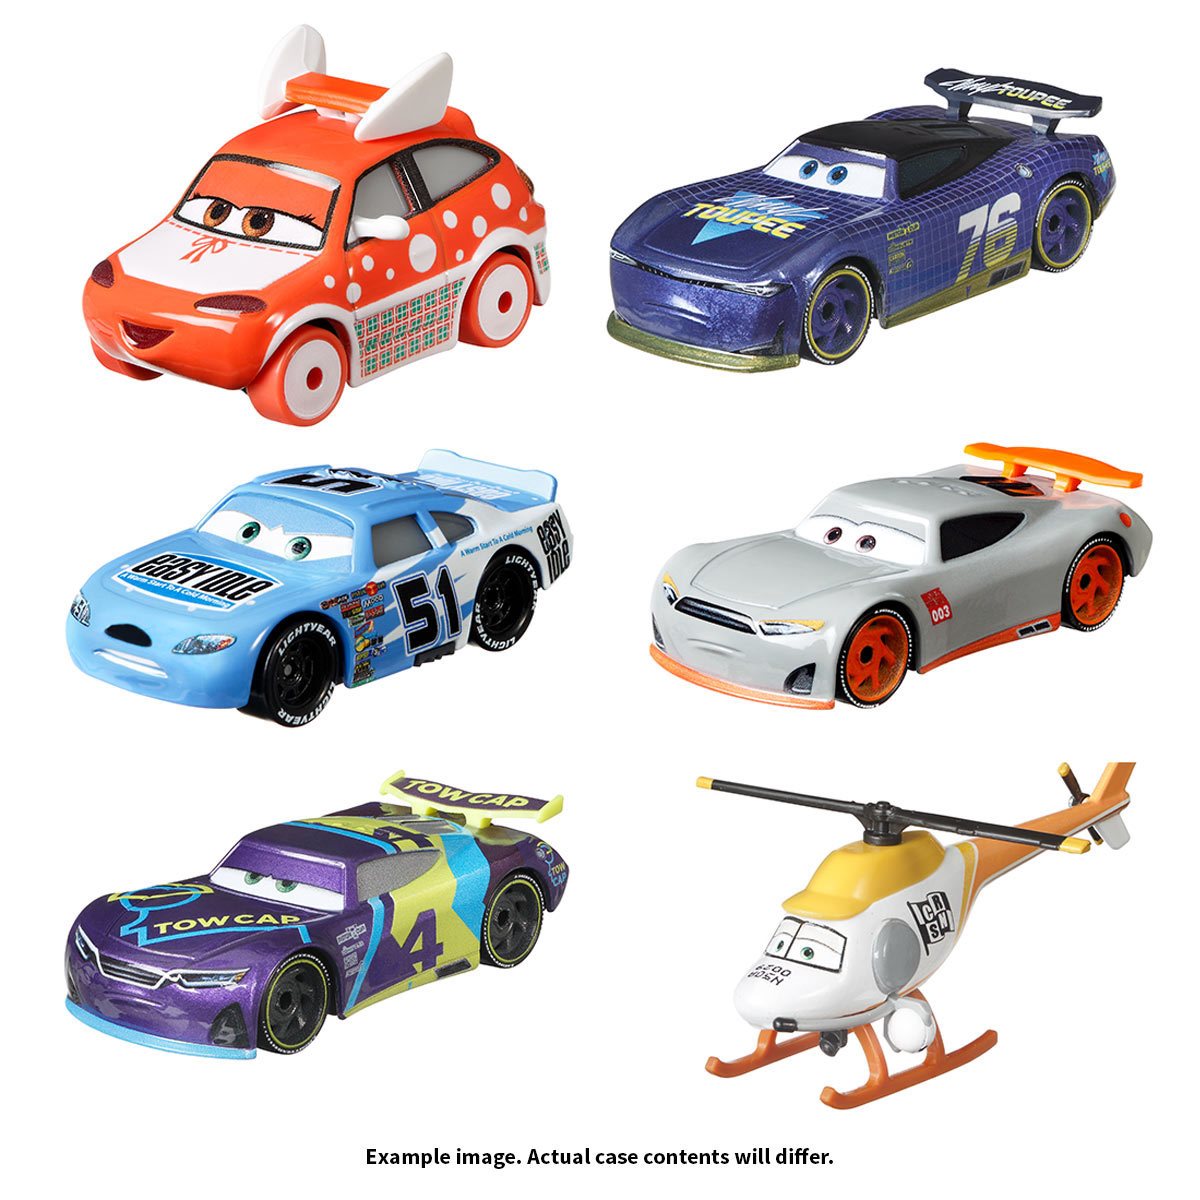 Cars 3 Character Cars Mix - Entertainment Earth